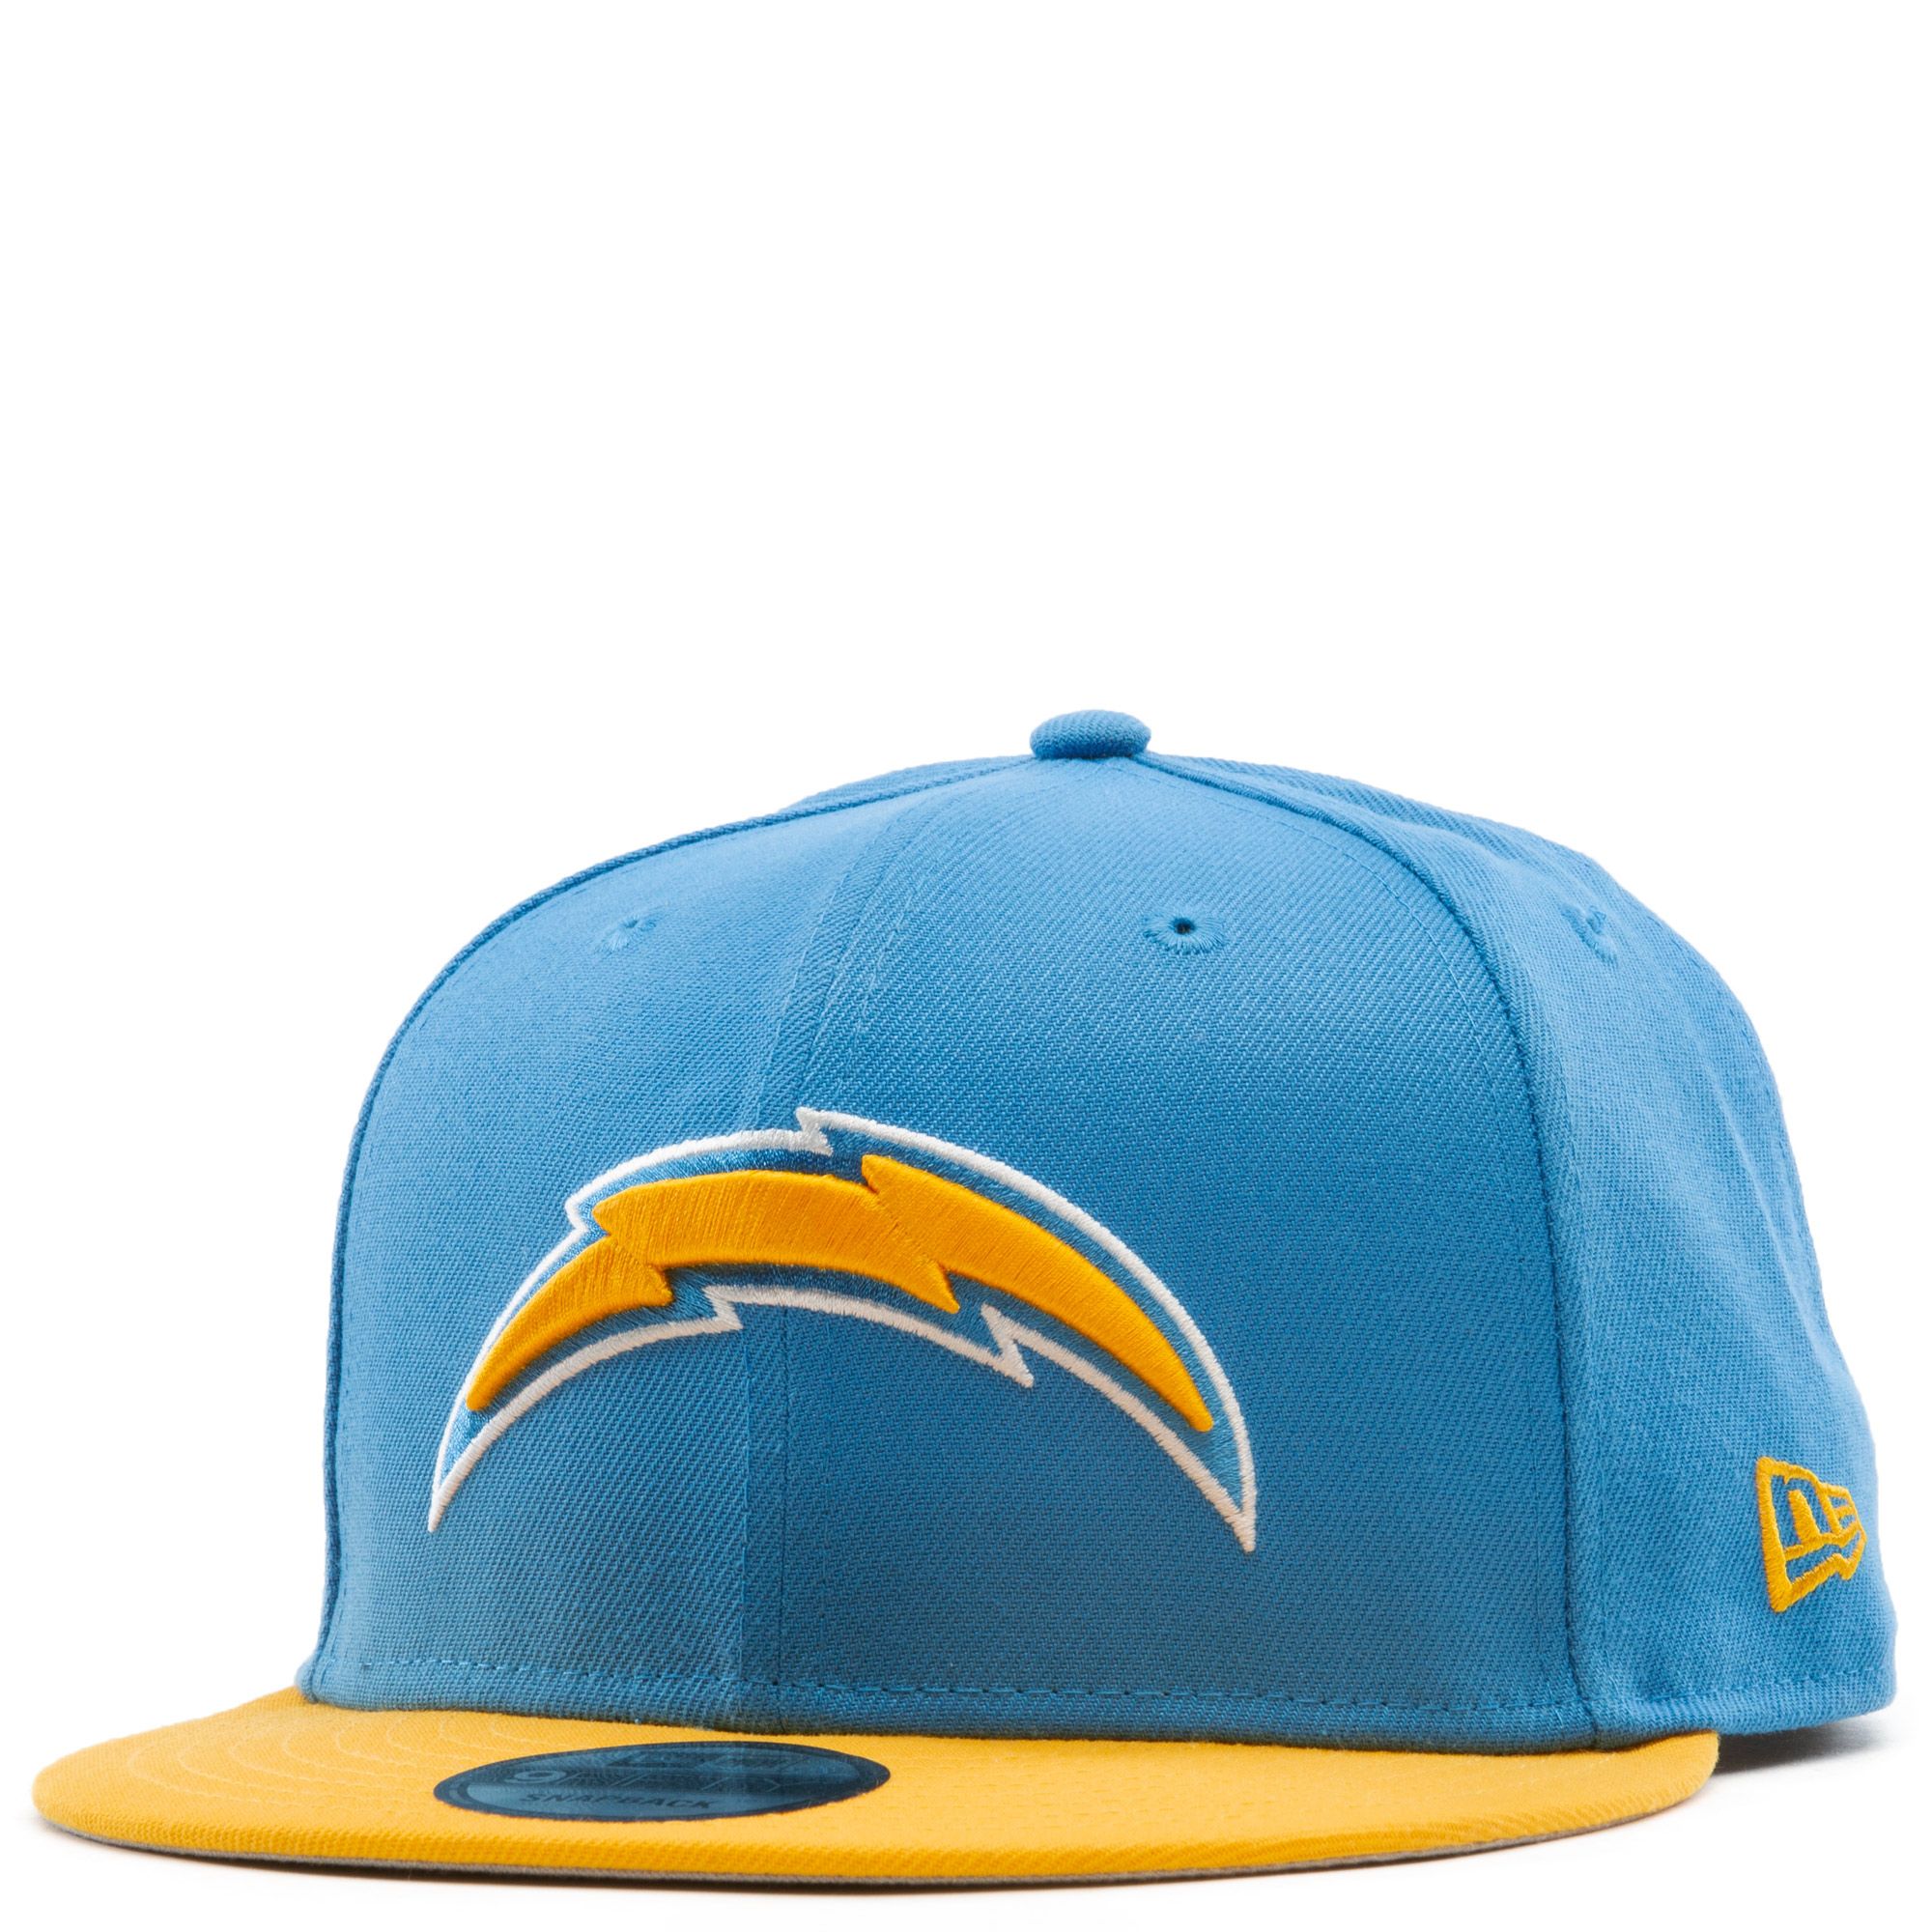 yellow chargers hat